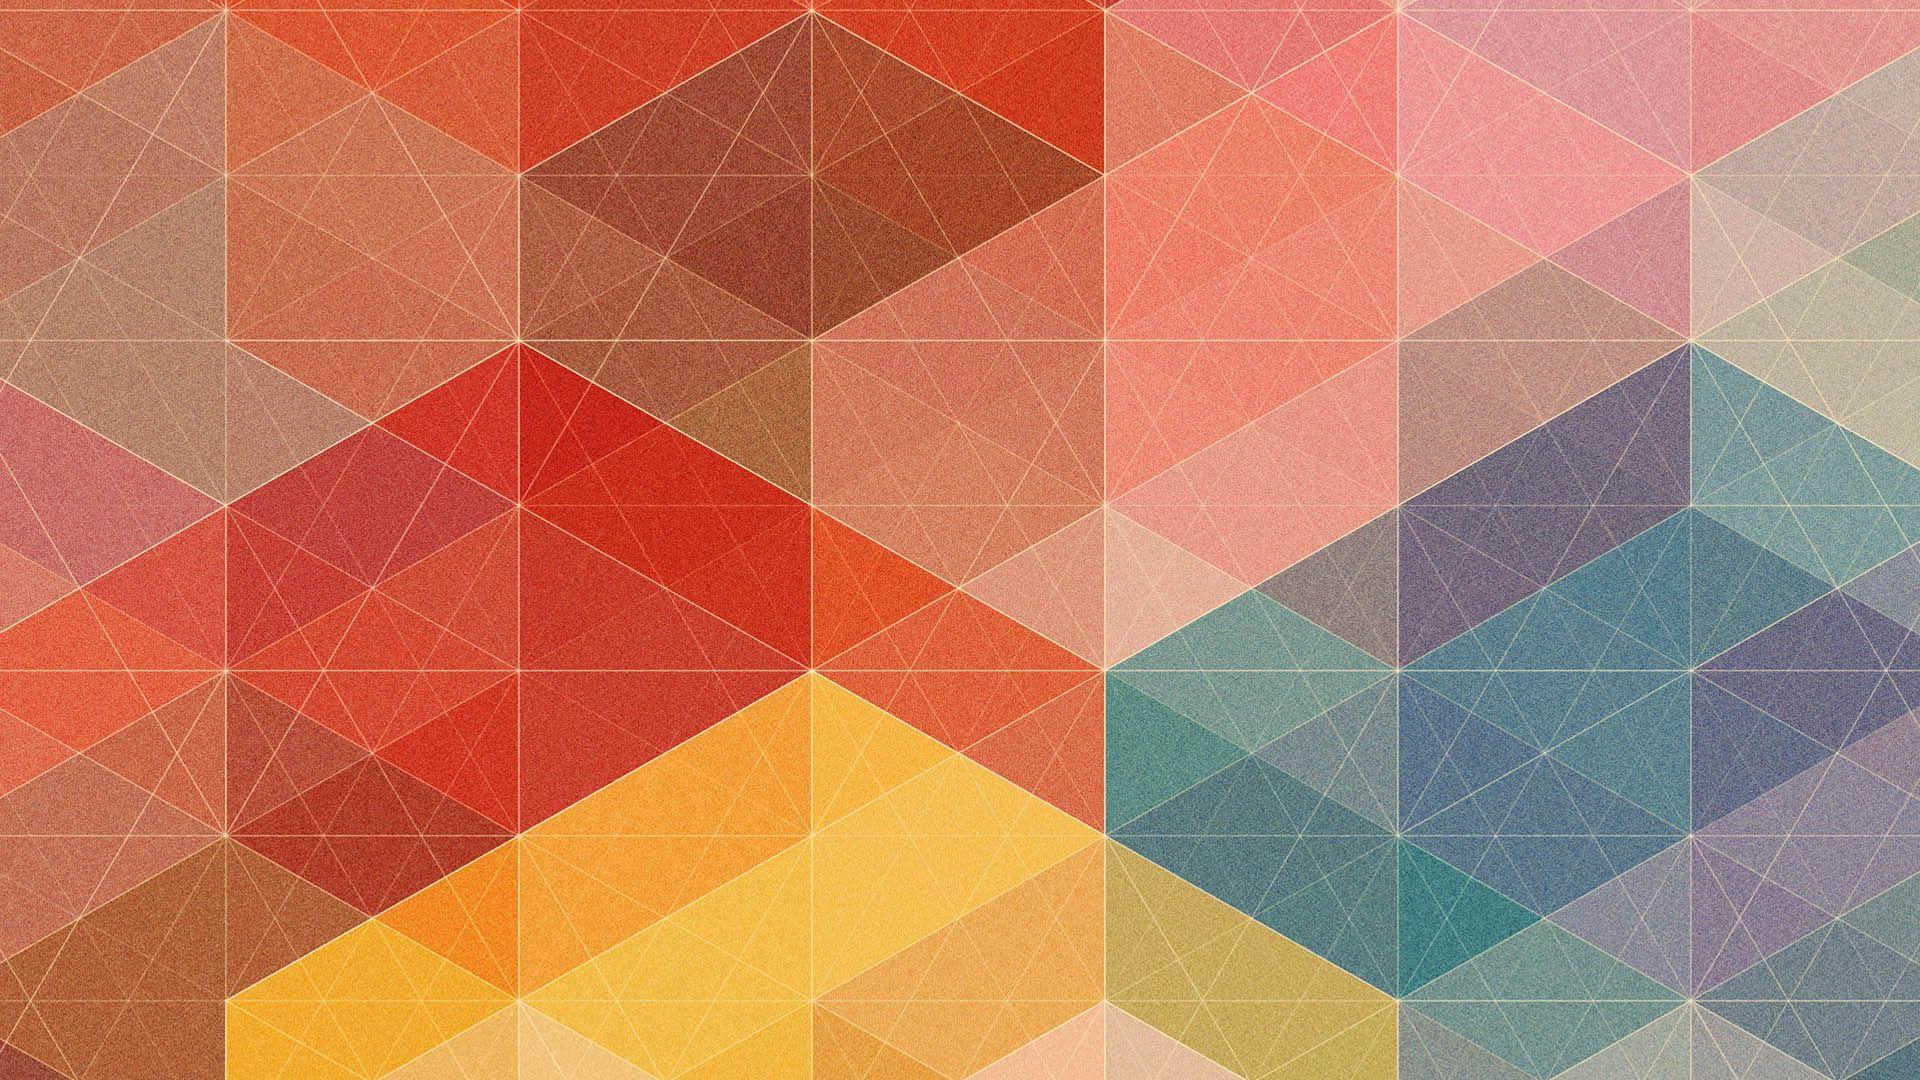 Connected Dots Colorful Triangles Pattern Desktop Wallpaper